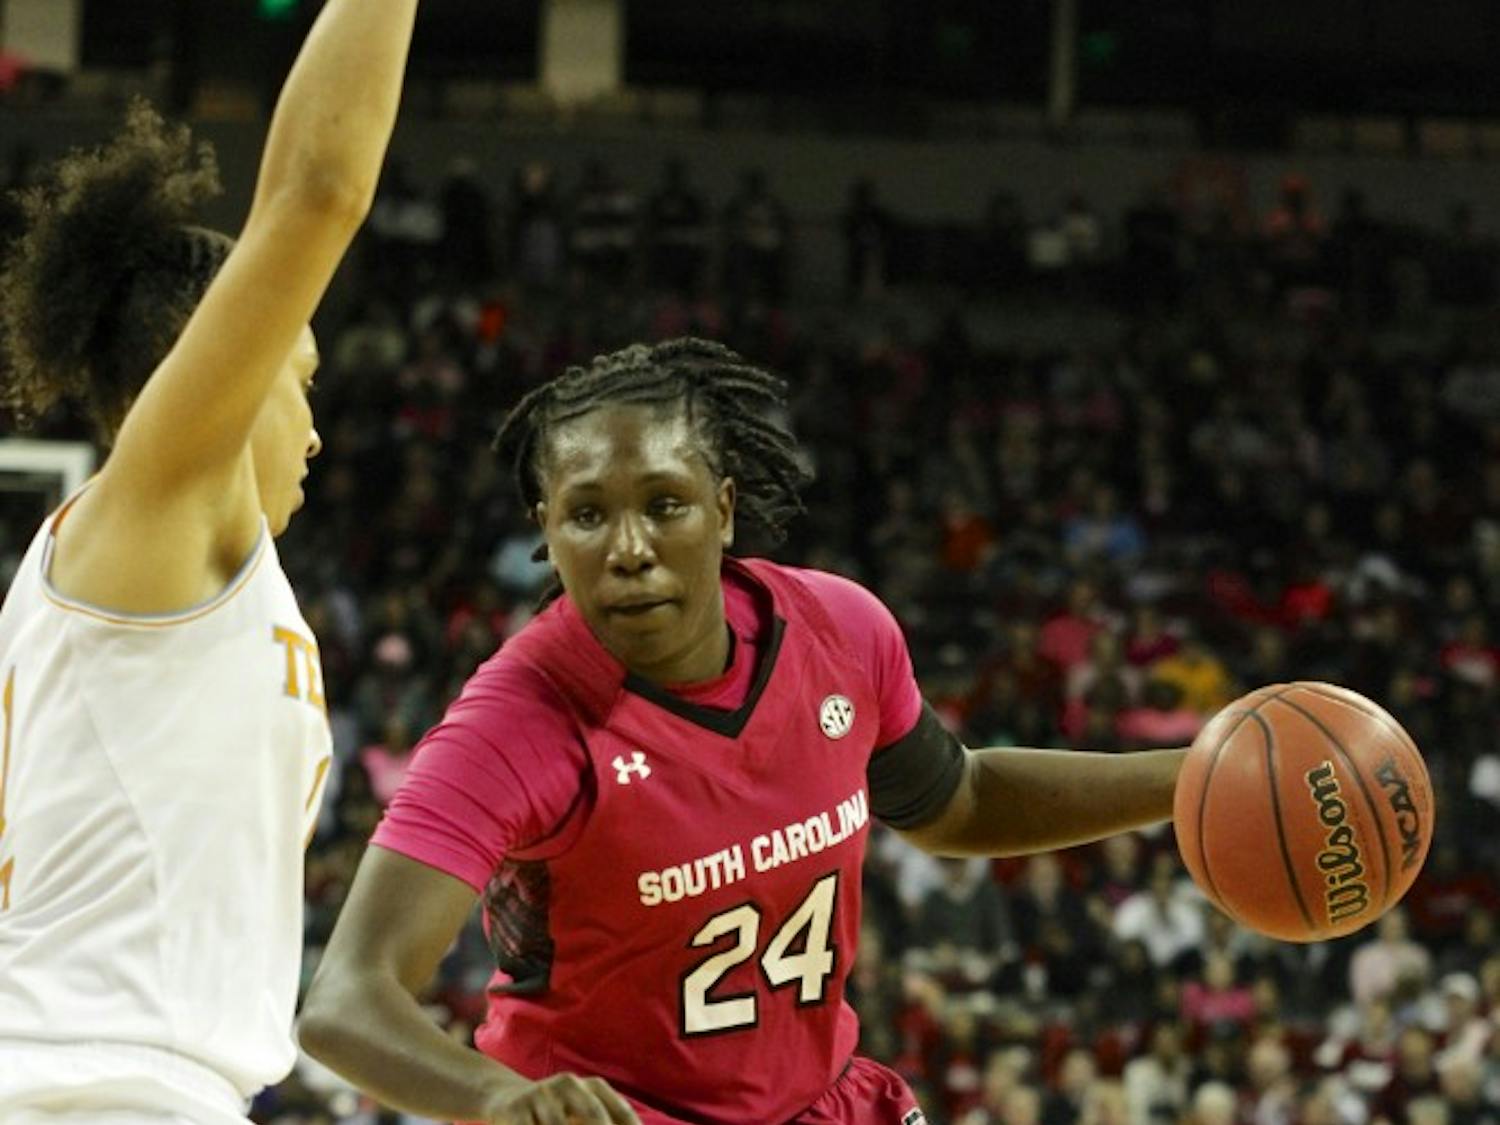 No. 2 South Carolina senior forward Aleighsa Welch scored a team-high 19 points in the Gamecocks' 71-66 win over No. 6 Tennessee, but her biggest impact was on the boards. Welch came down with 14 rebounds, nine of which were offensive. 